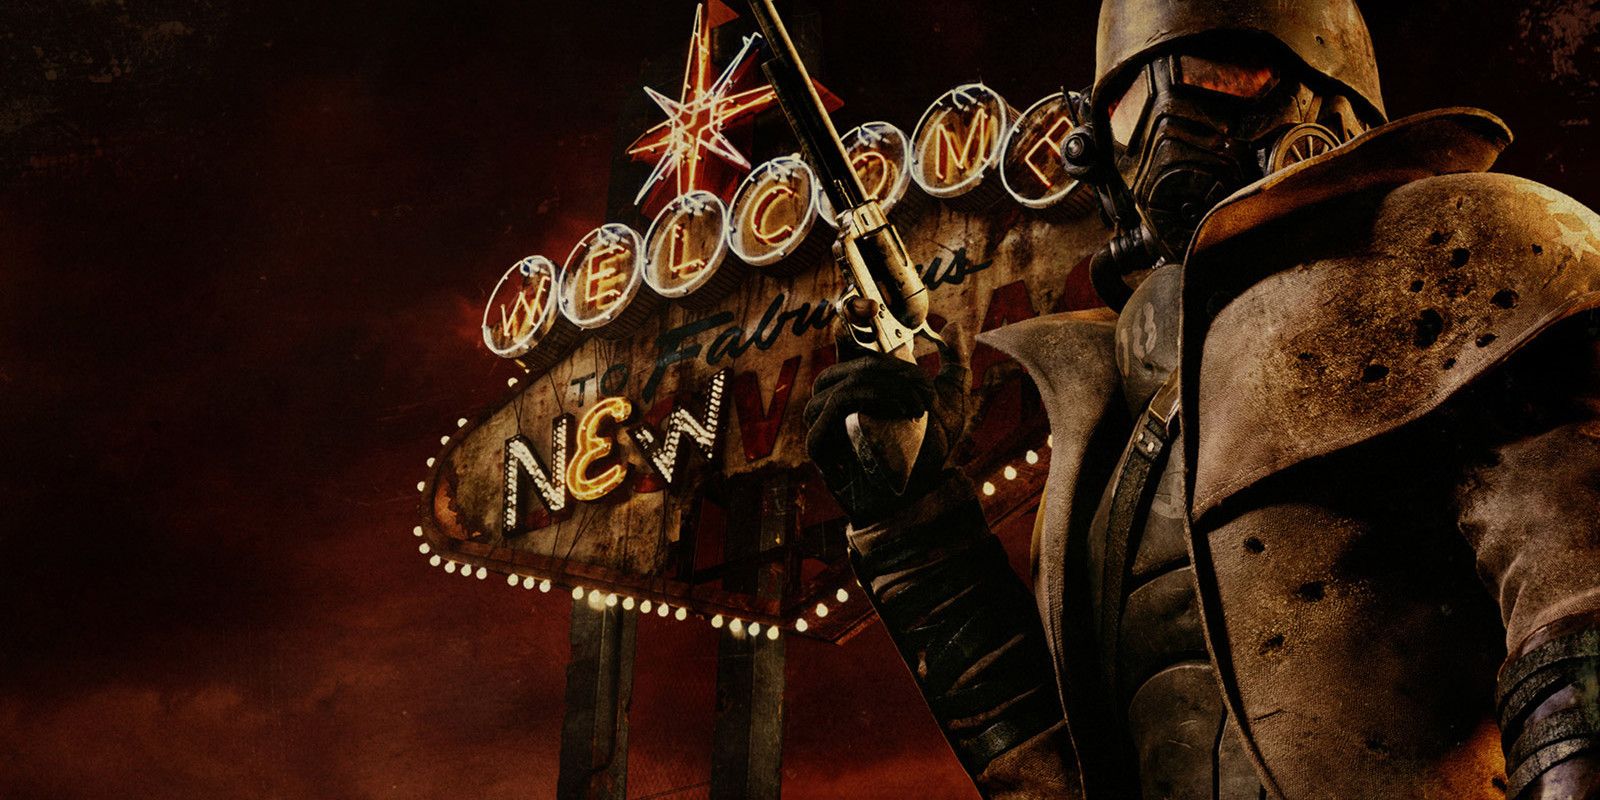 Image of an armored Fallout New Vegas character in front of a Welcome to New Vegas sign.